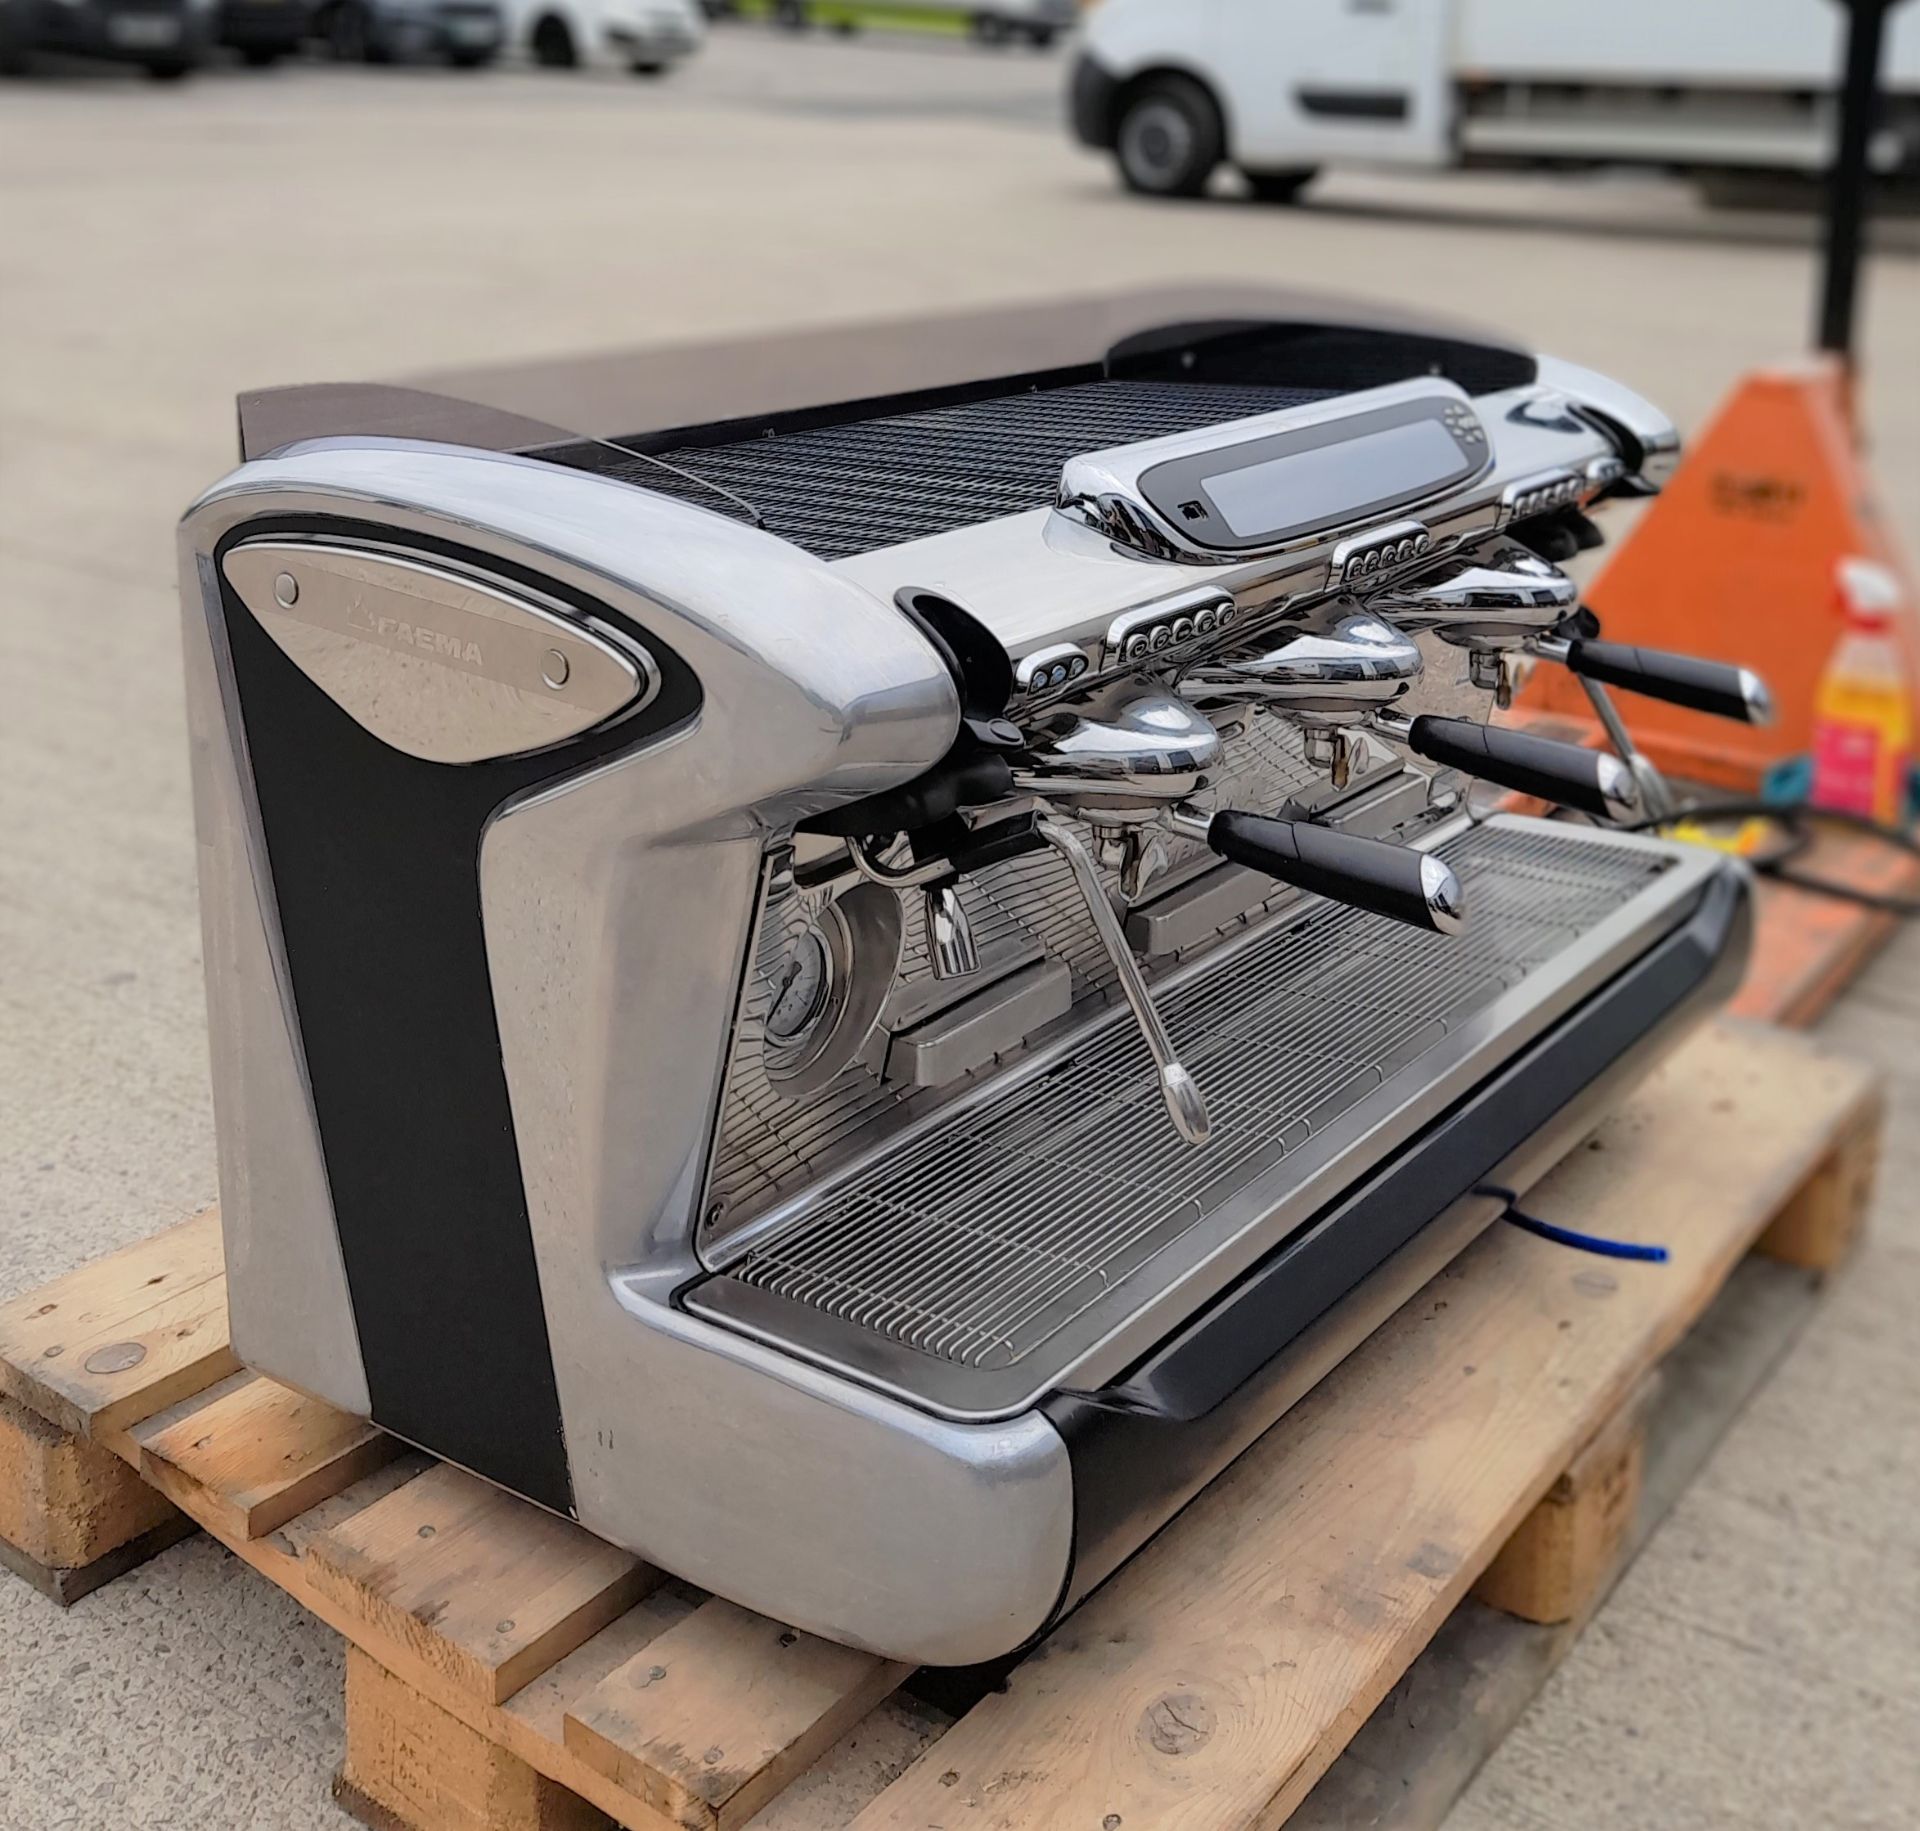 1 x Faema Emblema 3 Group Espresso Coffee Machine - 3 Phase Power - Stainless Steel Finish - Image 2 of 8